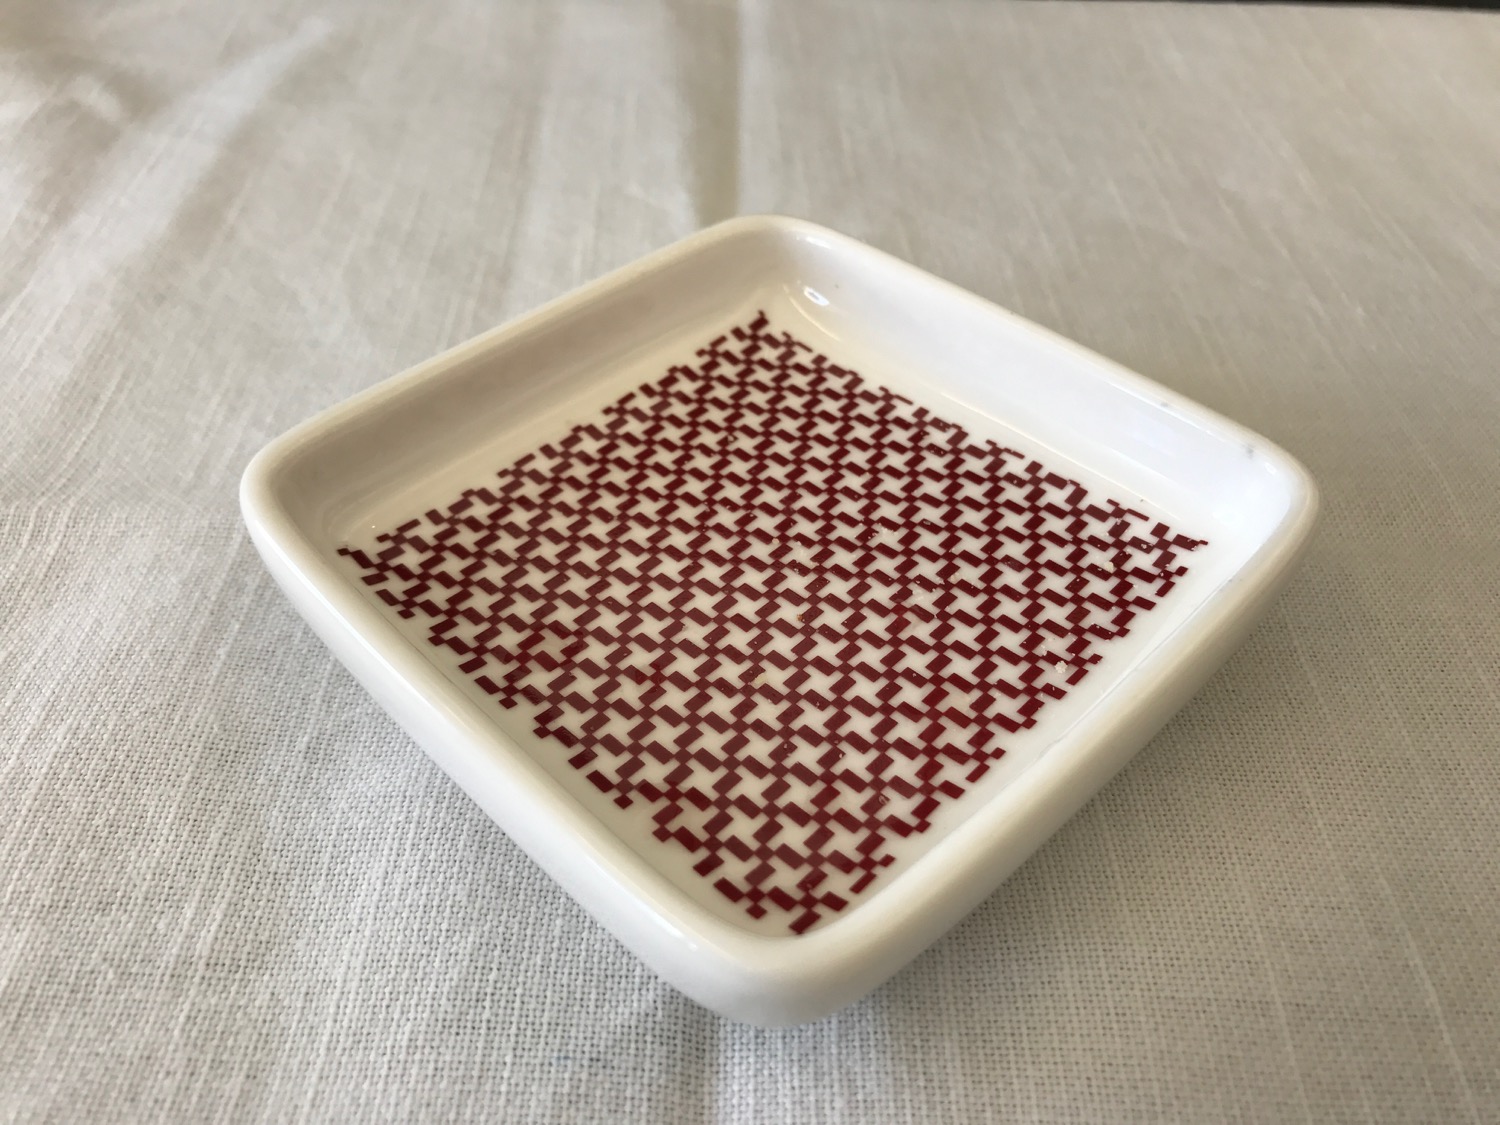 a small square white and red dish